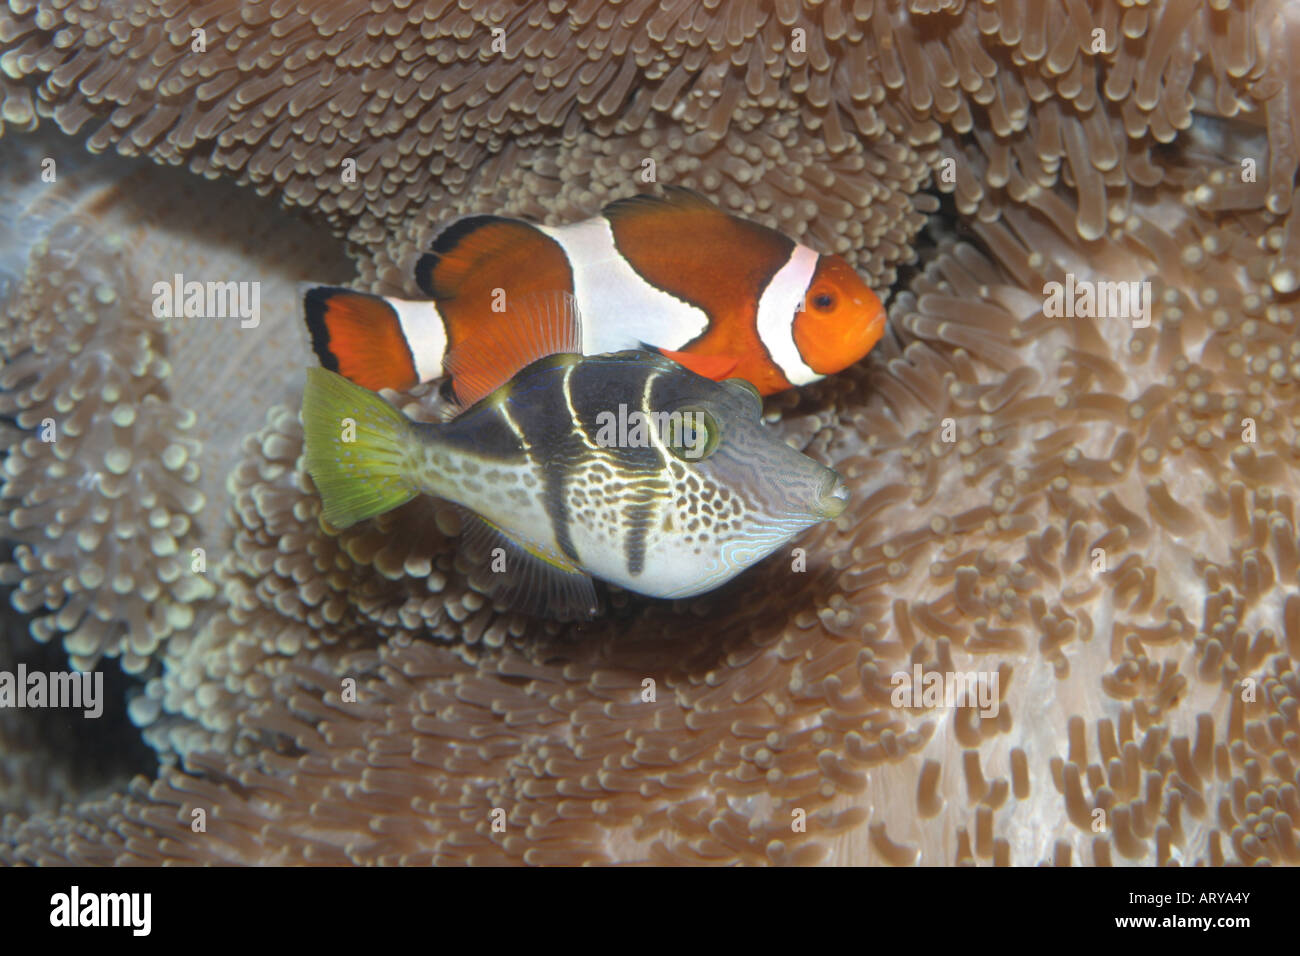 Waikiki Aquarium's more popular residents include the Mimic Filefish  and the Clown Anemonefish (background). Stock Photo